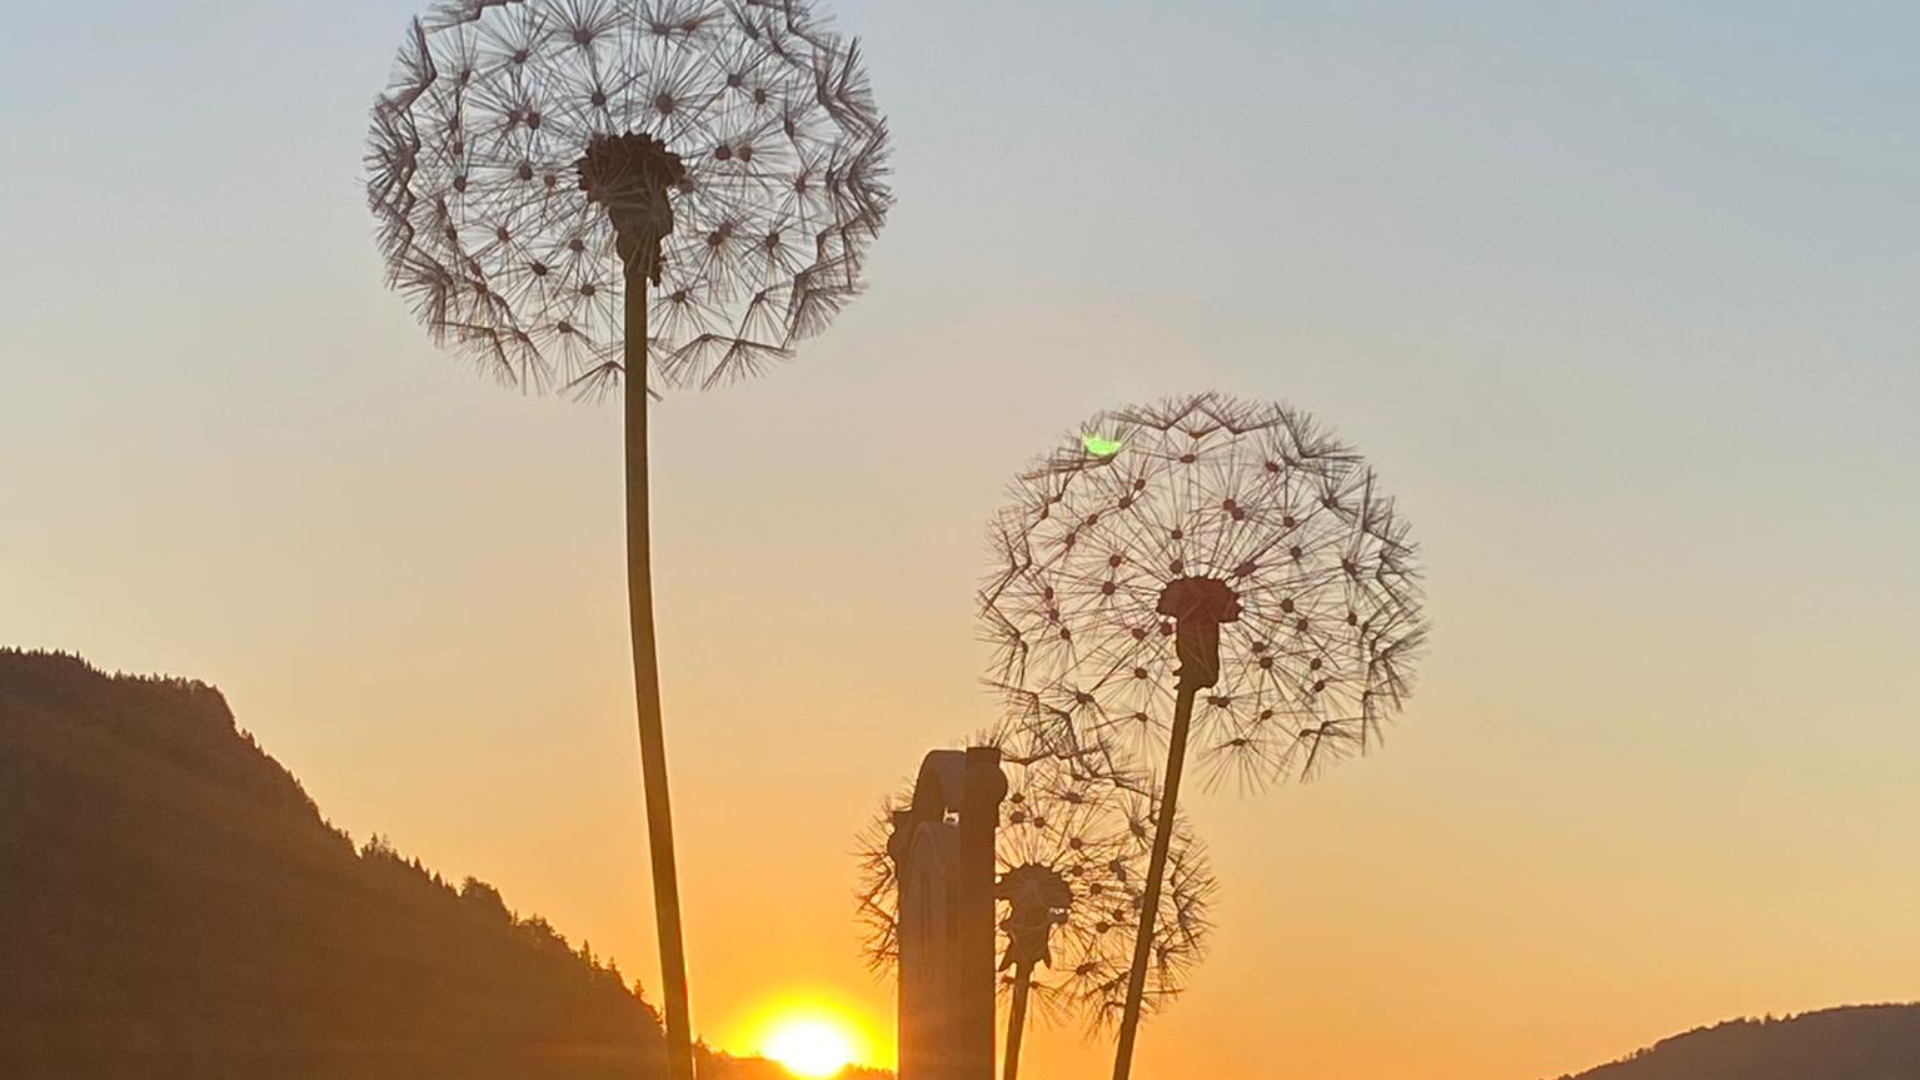 Dandelions with the afterglow. 